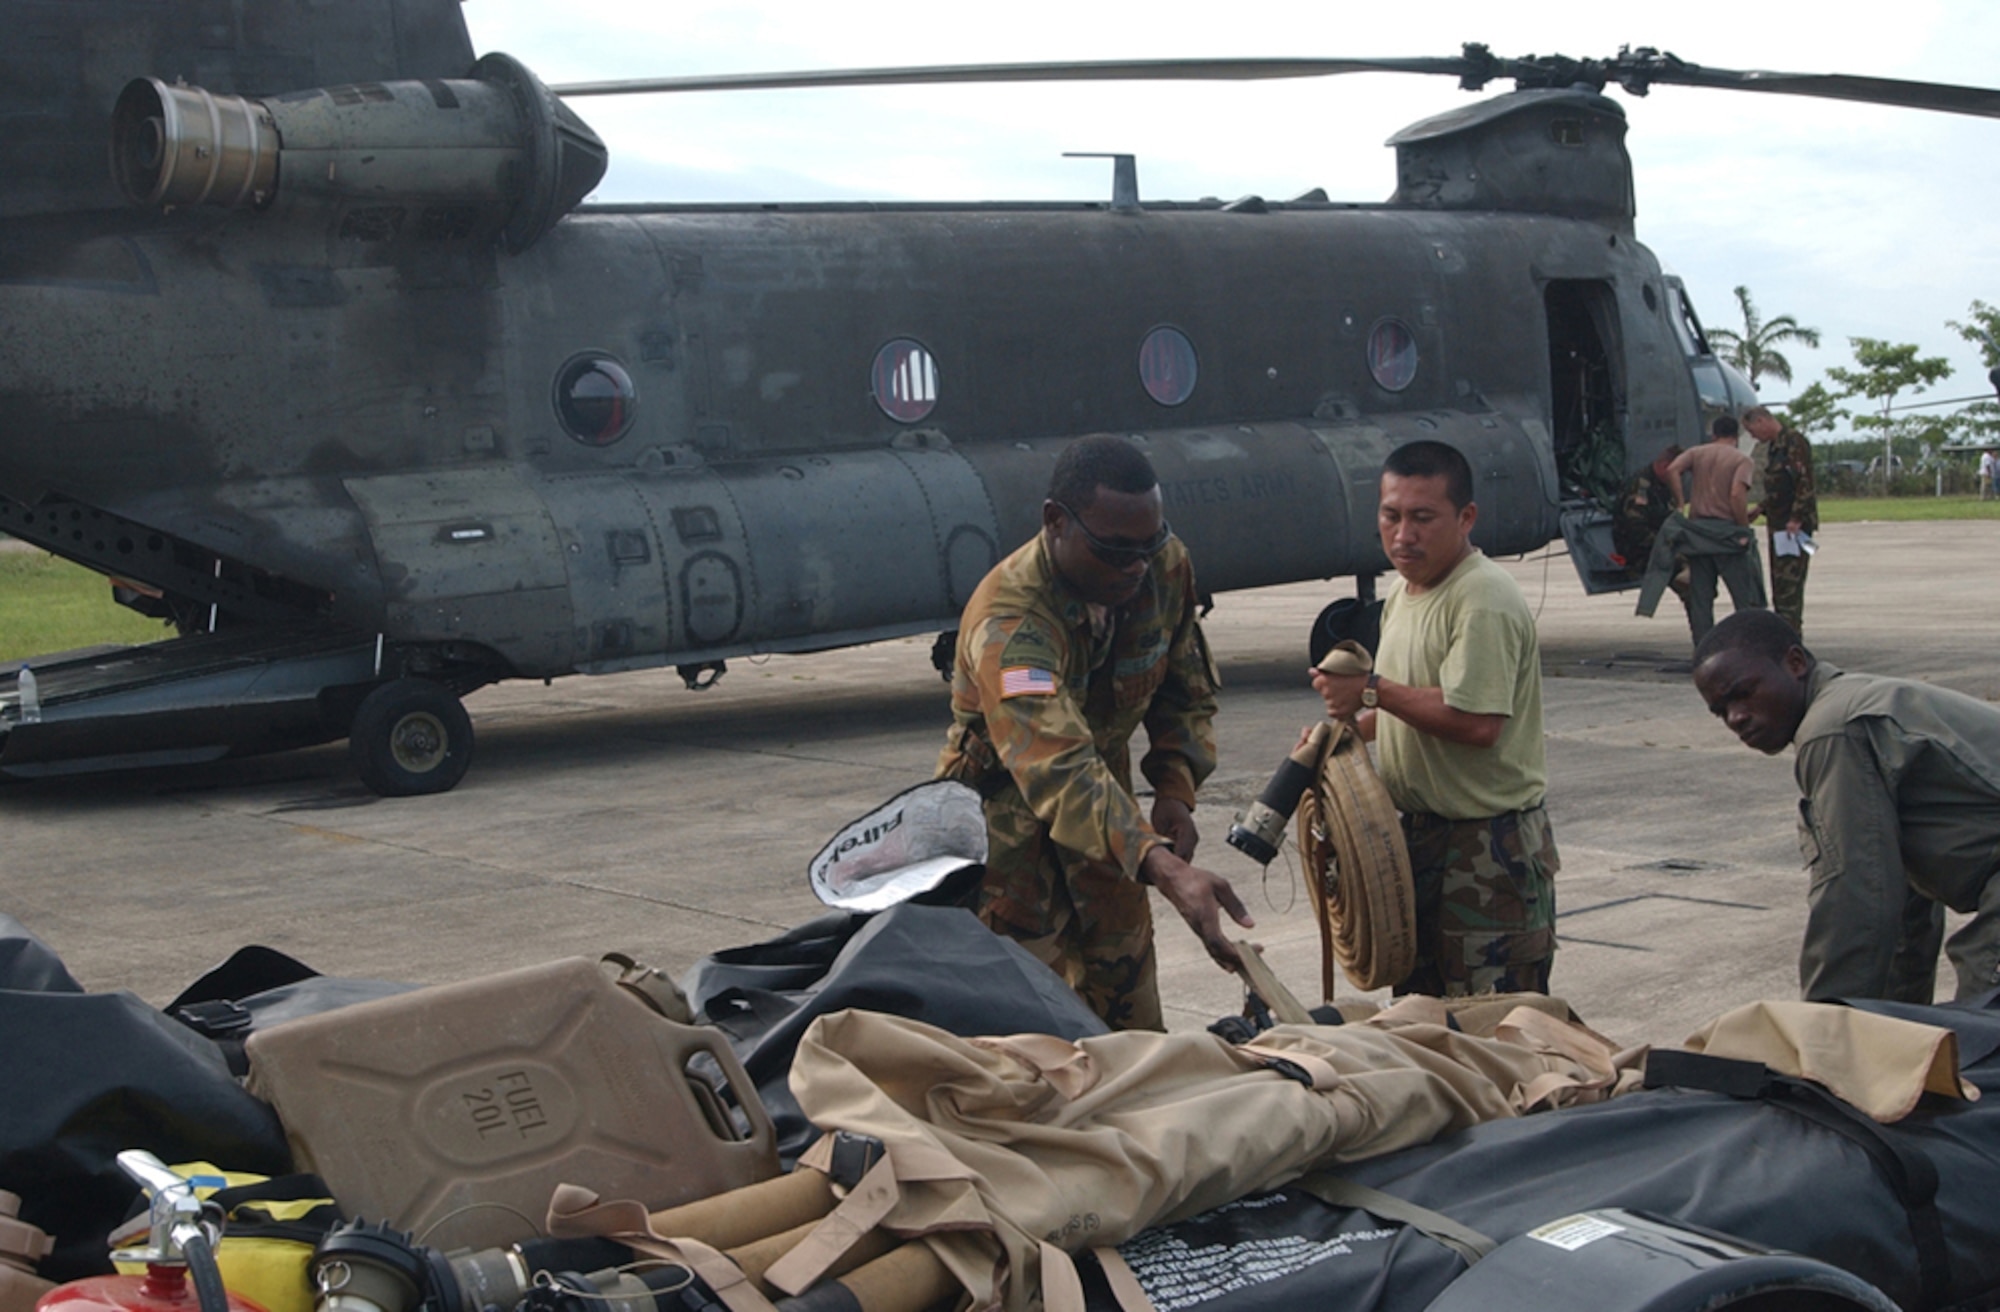 BELIZE CITY, Belize ? Army Sgt. Barry Baptiste, a fuels specialist assigned to the 1st Battalion, 228th Aviation Regiment at Soto Cano Air Base, Honduras, loads cargo onto a trailer with the help of soldiers from the Belizean Defense Force here Aug. 21.  Sergeant Baptiste, a native of Brooklyn, N.Y., is here with a team of approximately 20 U.S. Soldiers and Airmen serving on an initial assessment team following the landfall of Hurricane Dean.  (U.S. Air Force photo by Tech. Sgt. Sonny Cohrs)                               